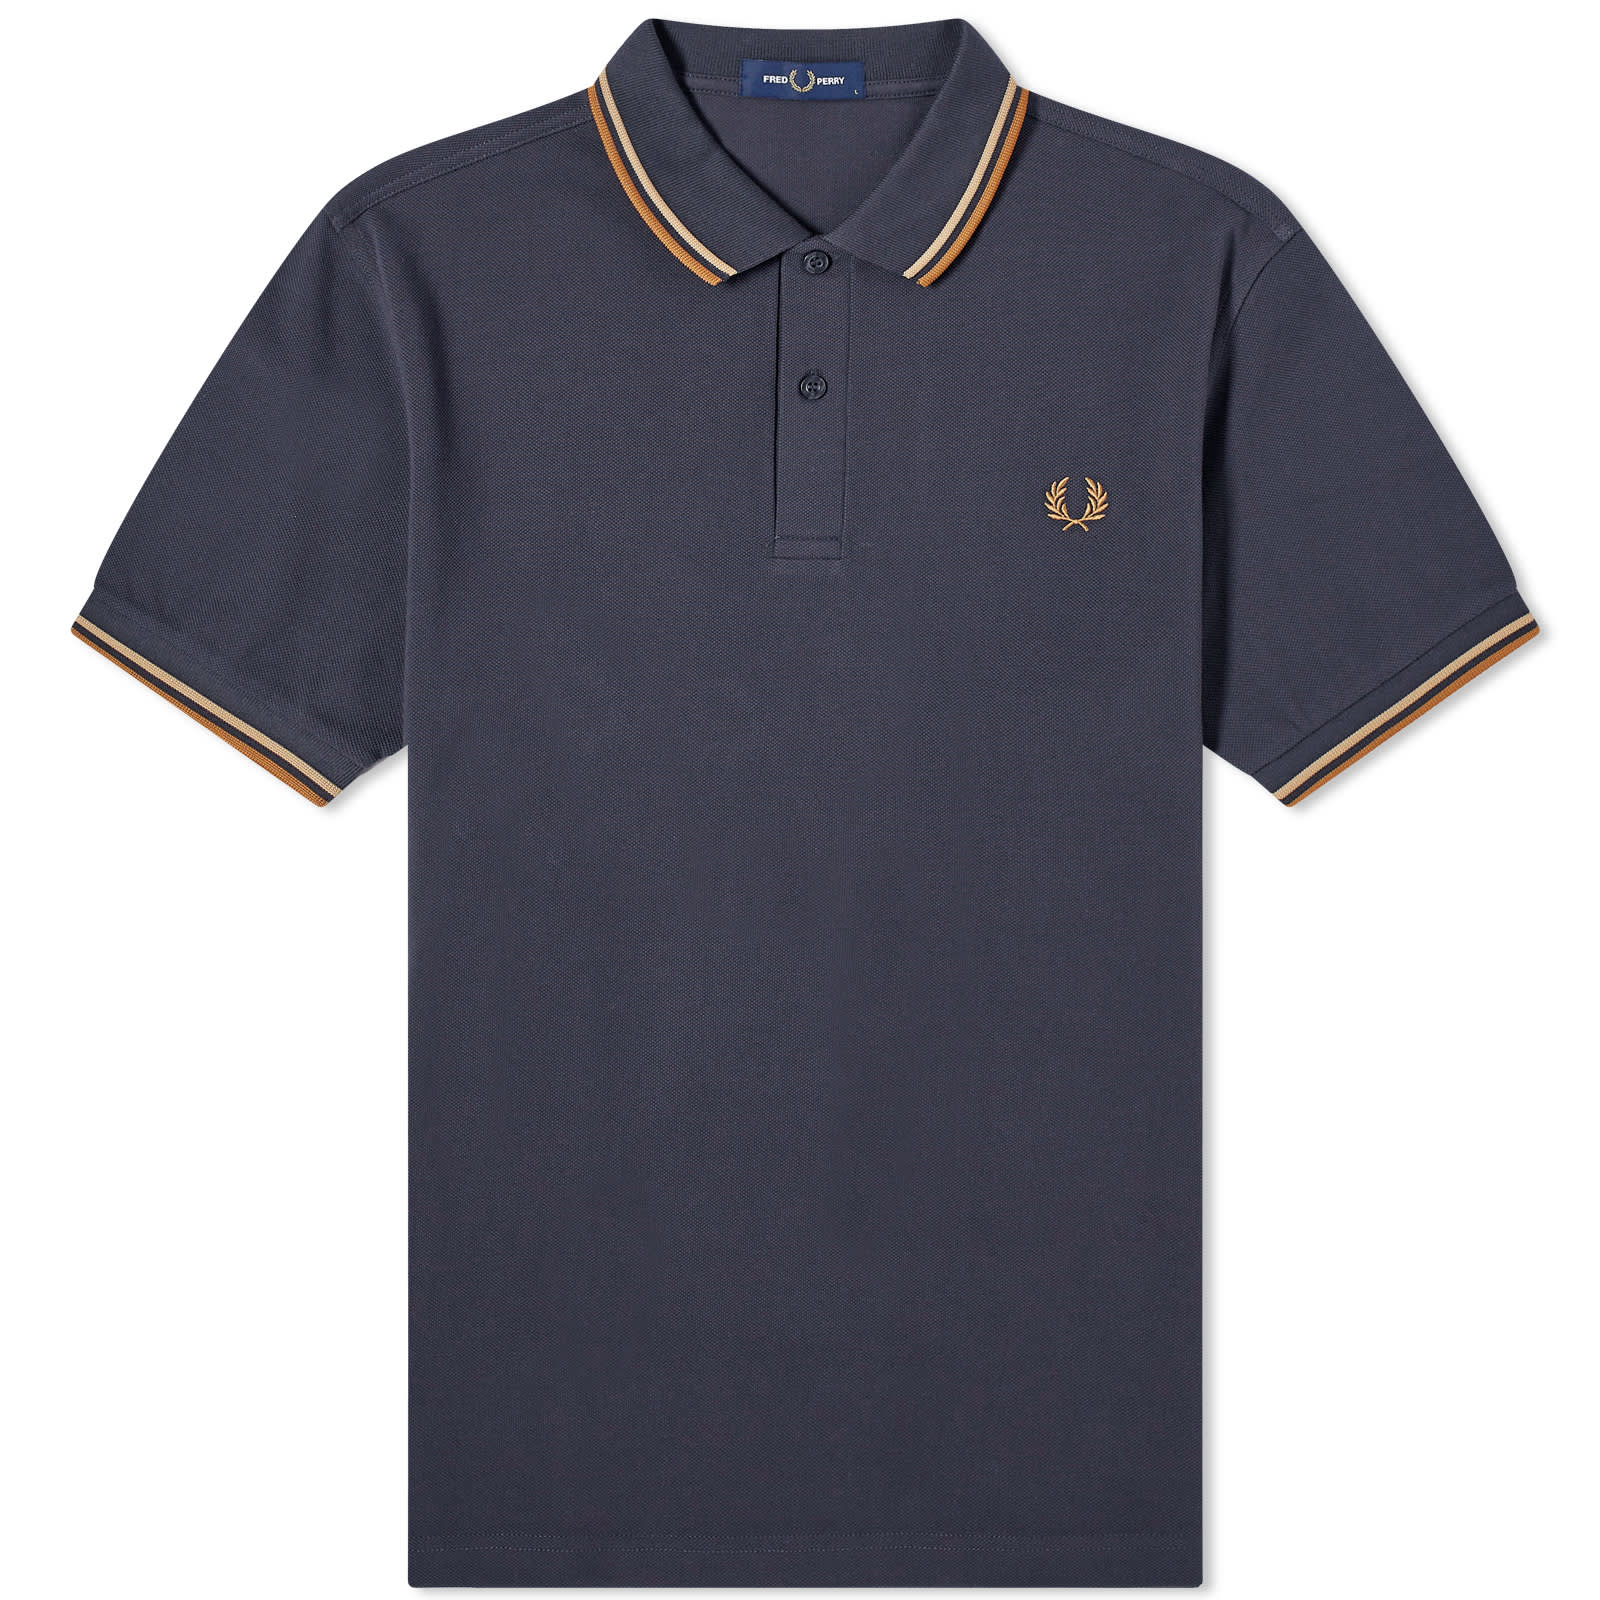 Поло Fred Perry Twin Tipped, цвет Grey, Stone & Caramel футболка поло fred perry twin tipped белый